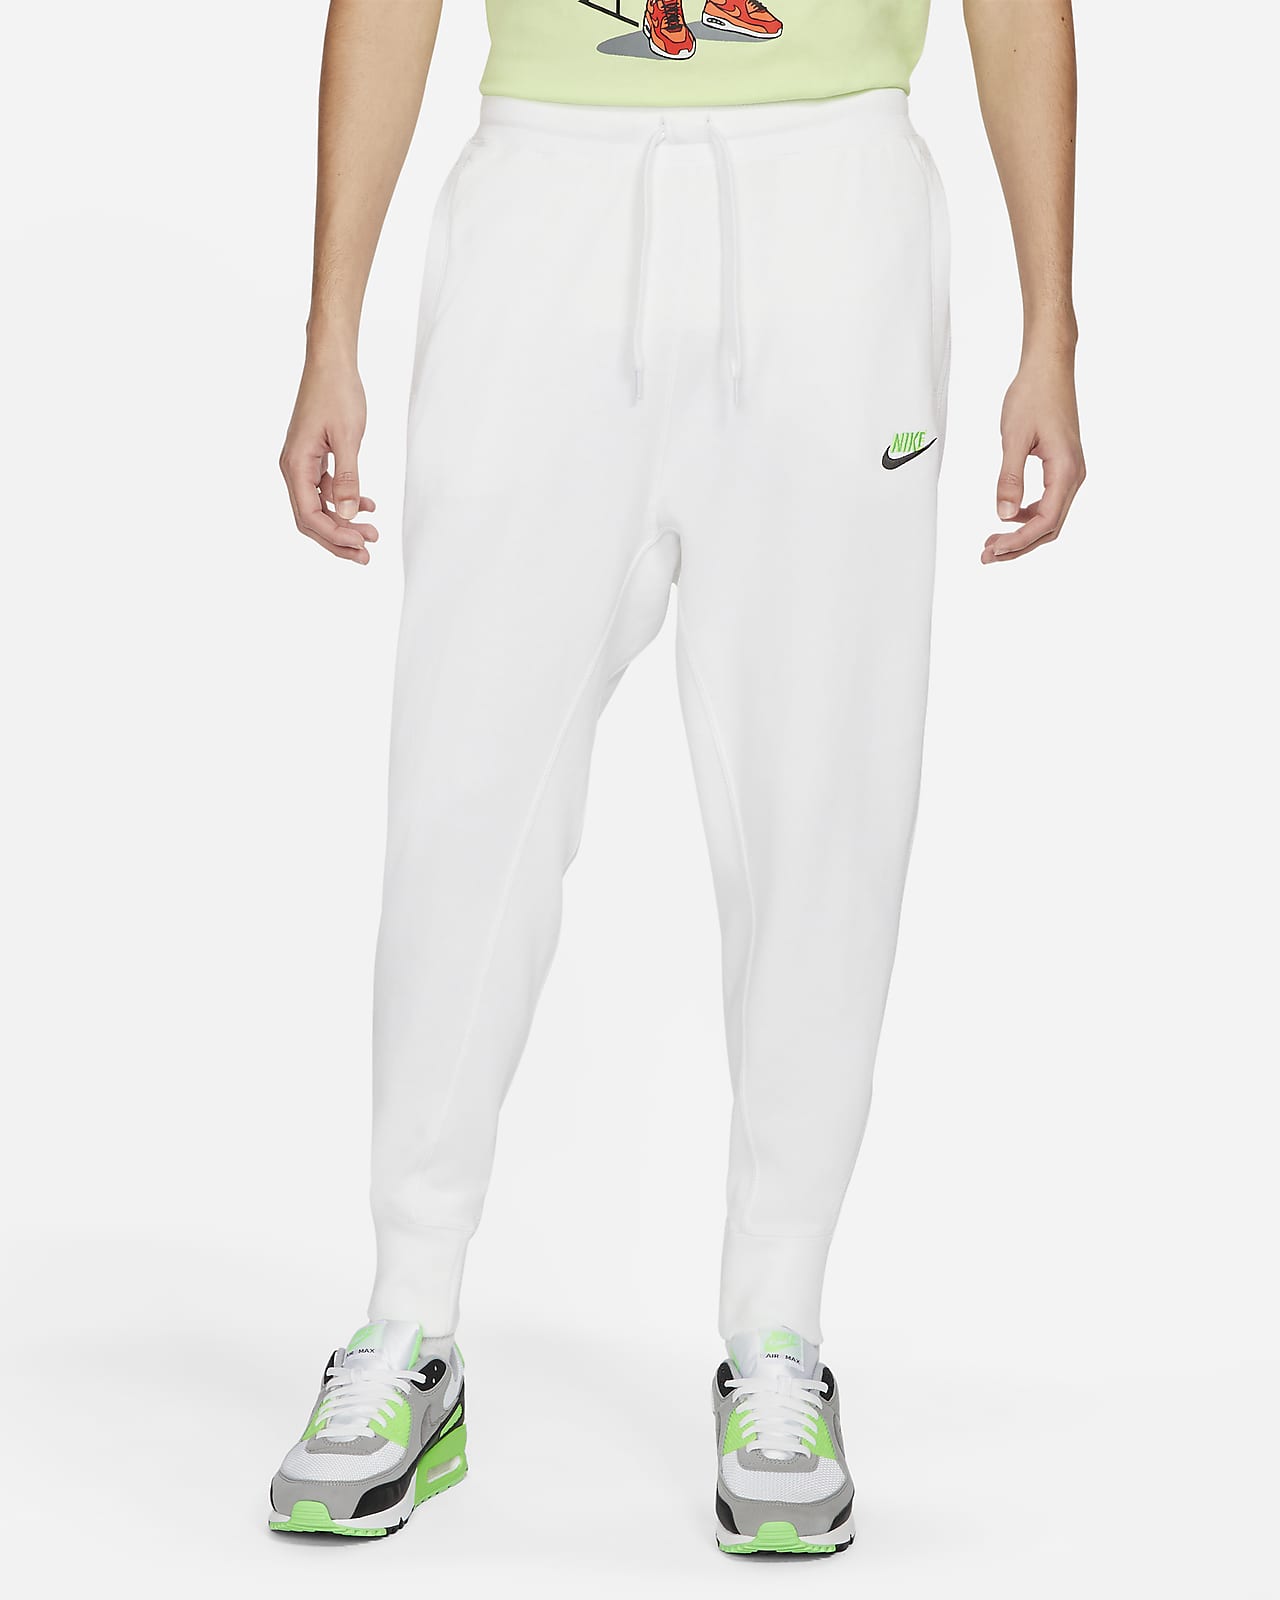 nike button up pants